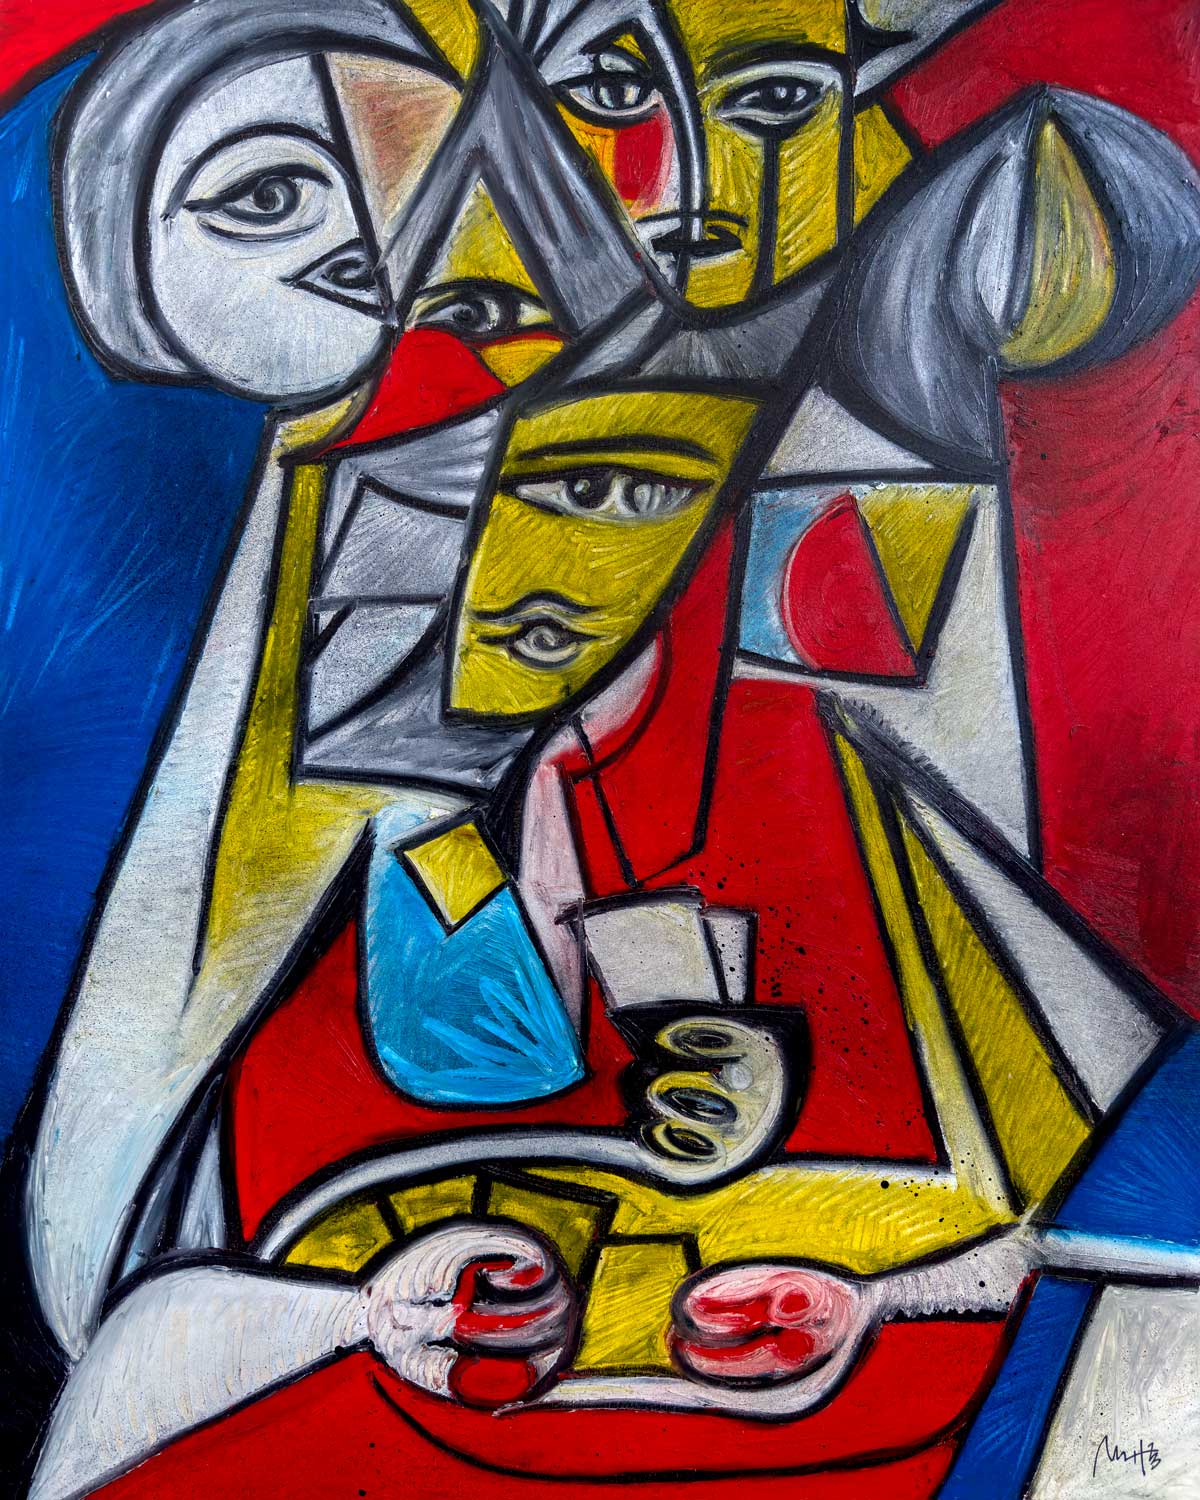 The Poker Player